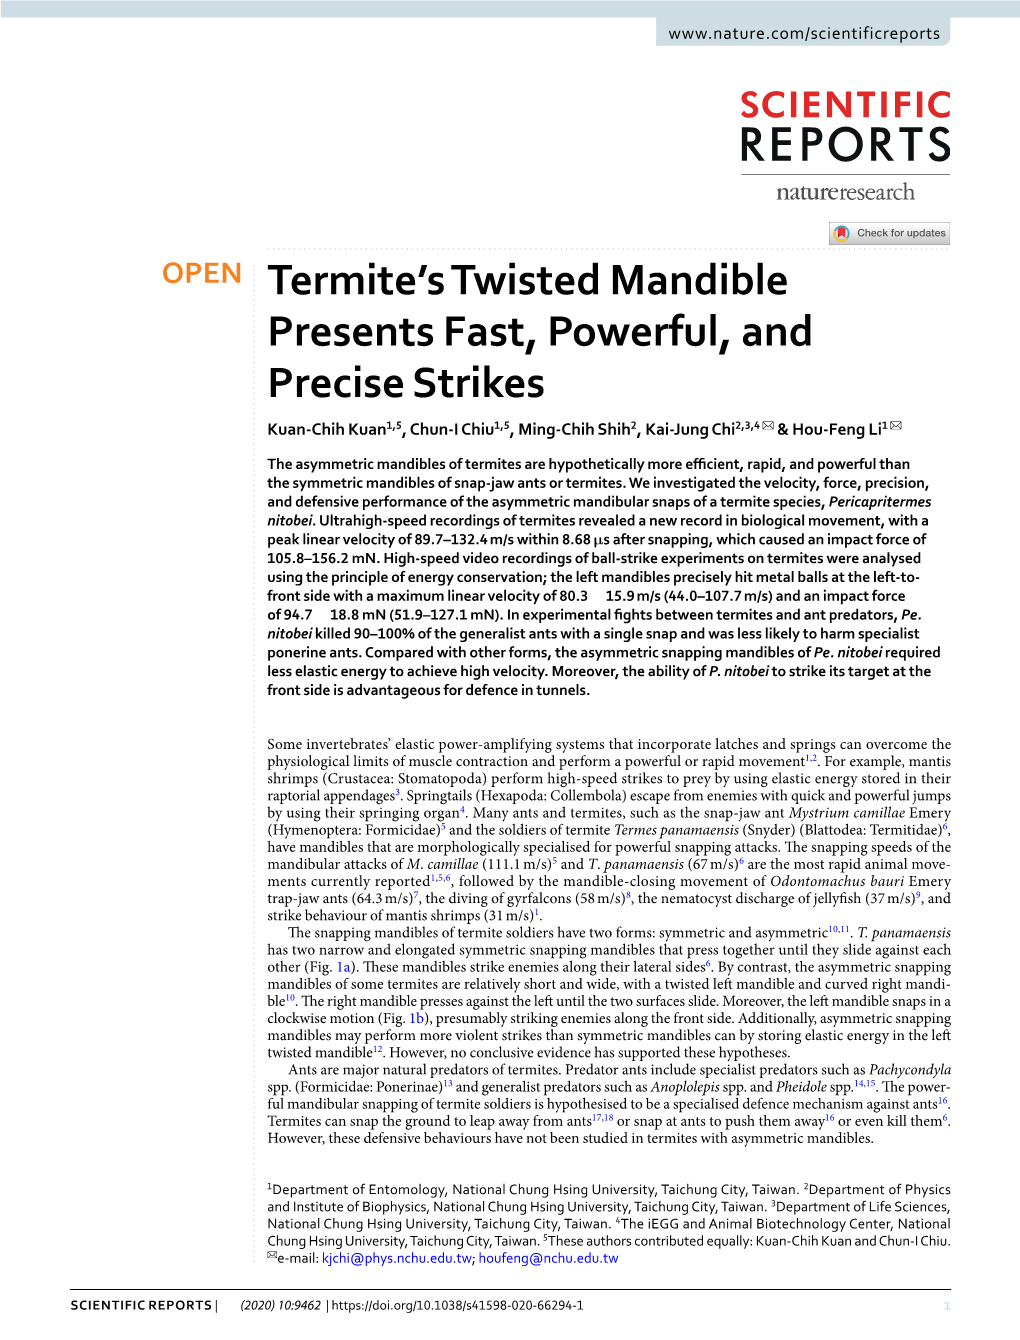 Termite's Twisted Mandible Presents Fast, Powerful, and Precise Strikes